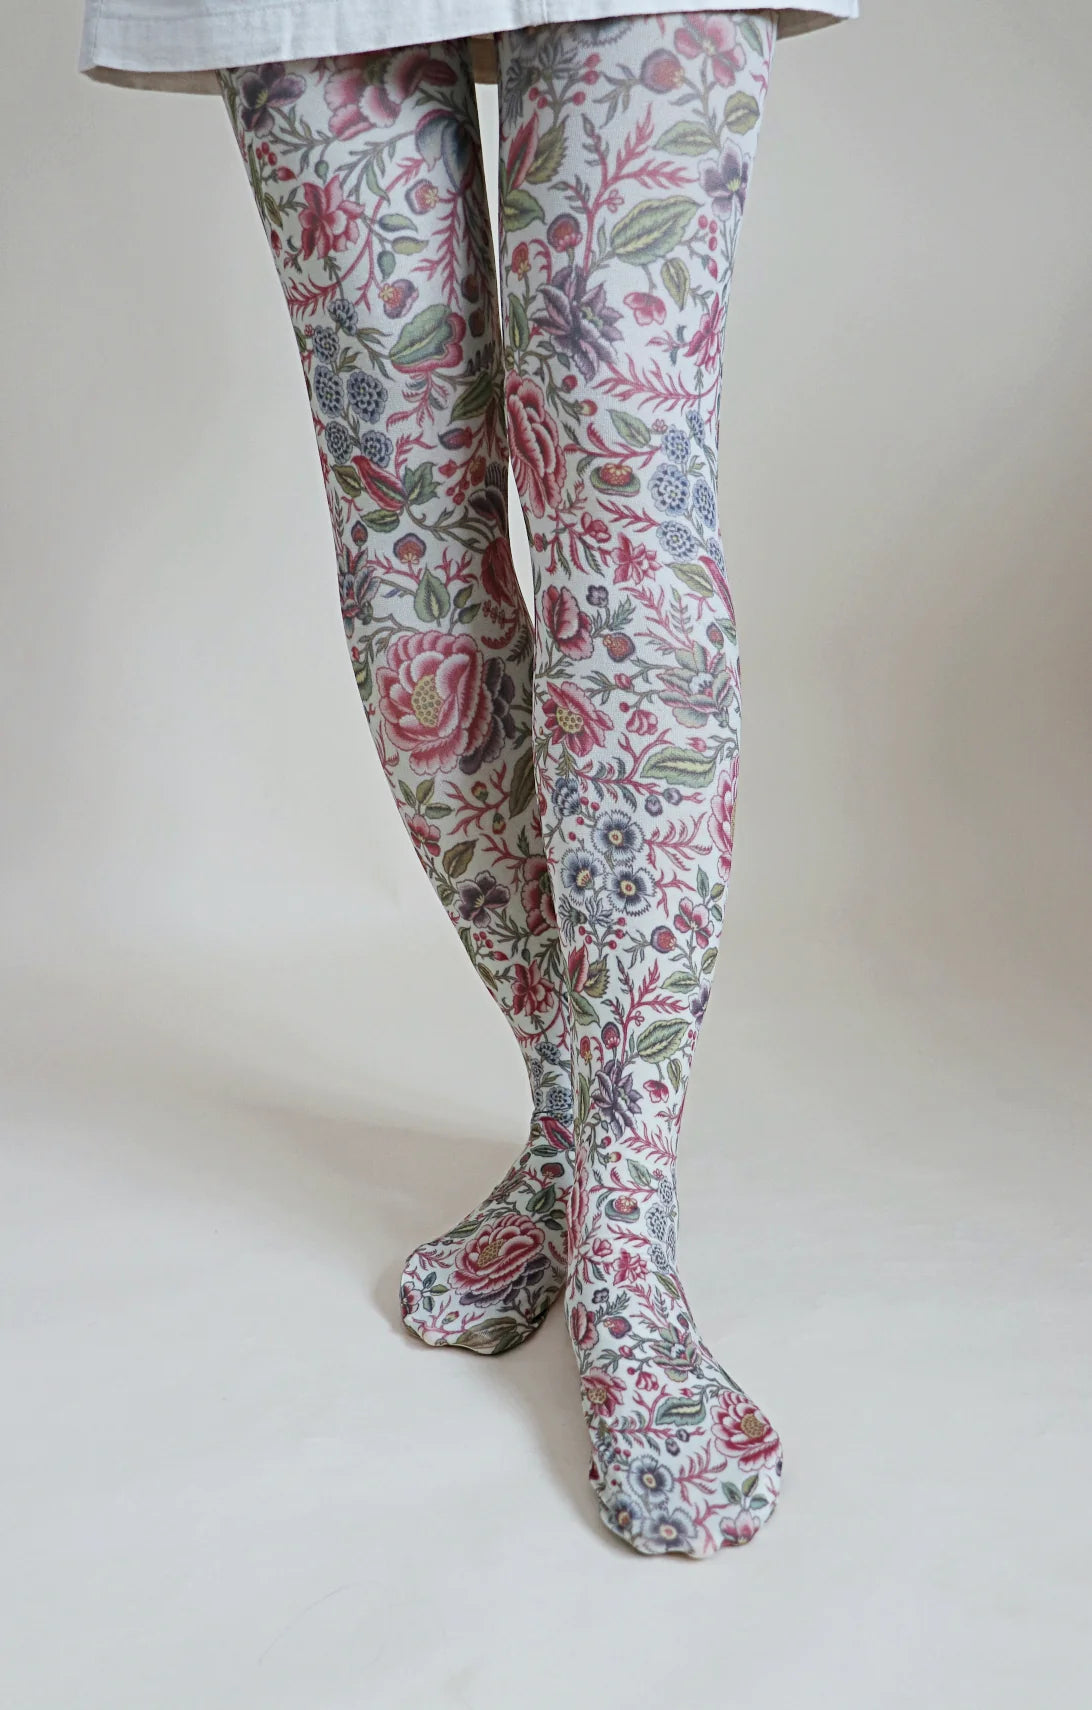 Printed Vintage Tights Floral, Tights Stockings, Floral Stocking, Pantyhose